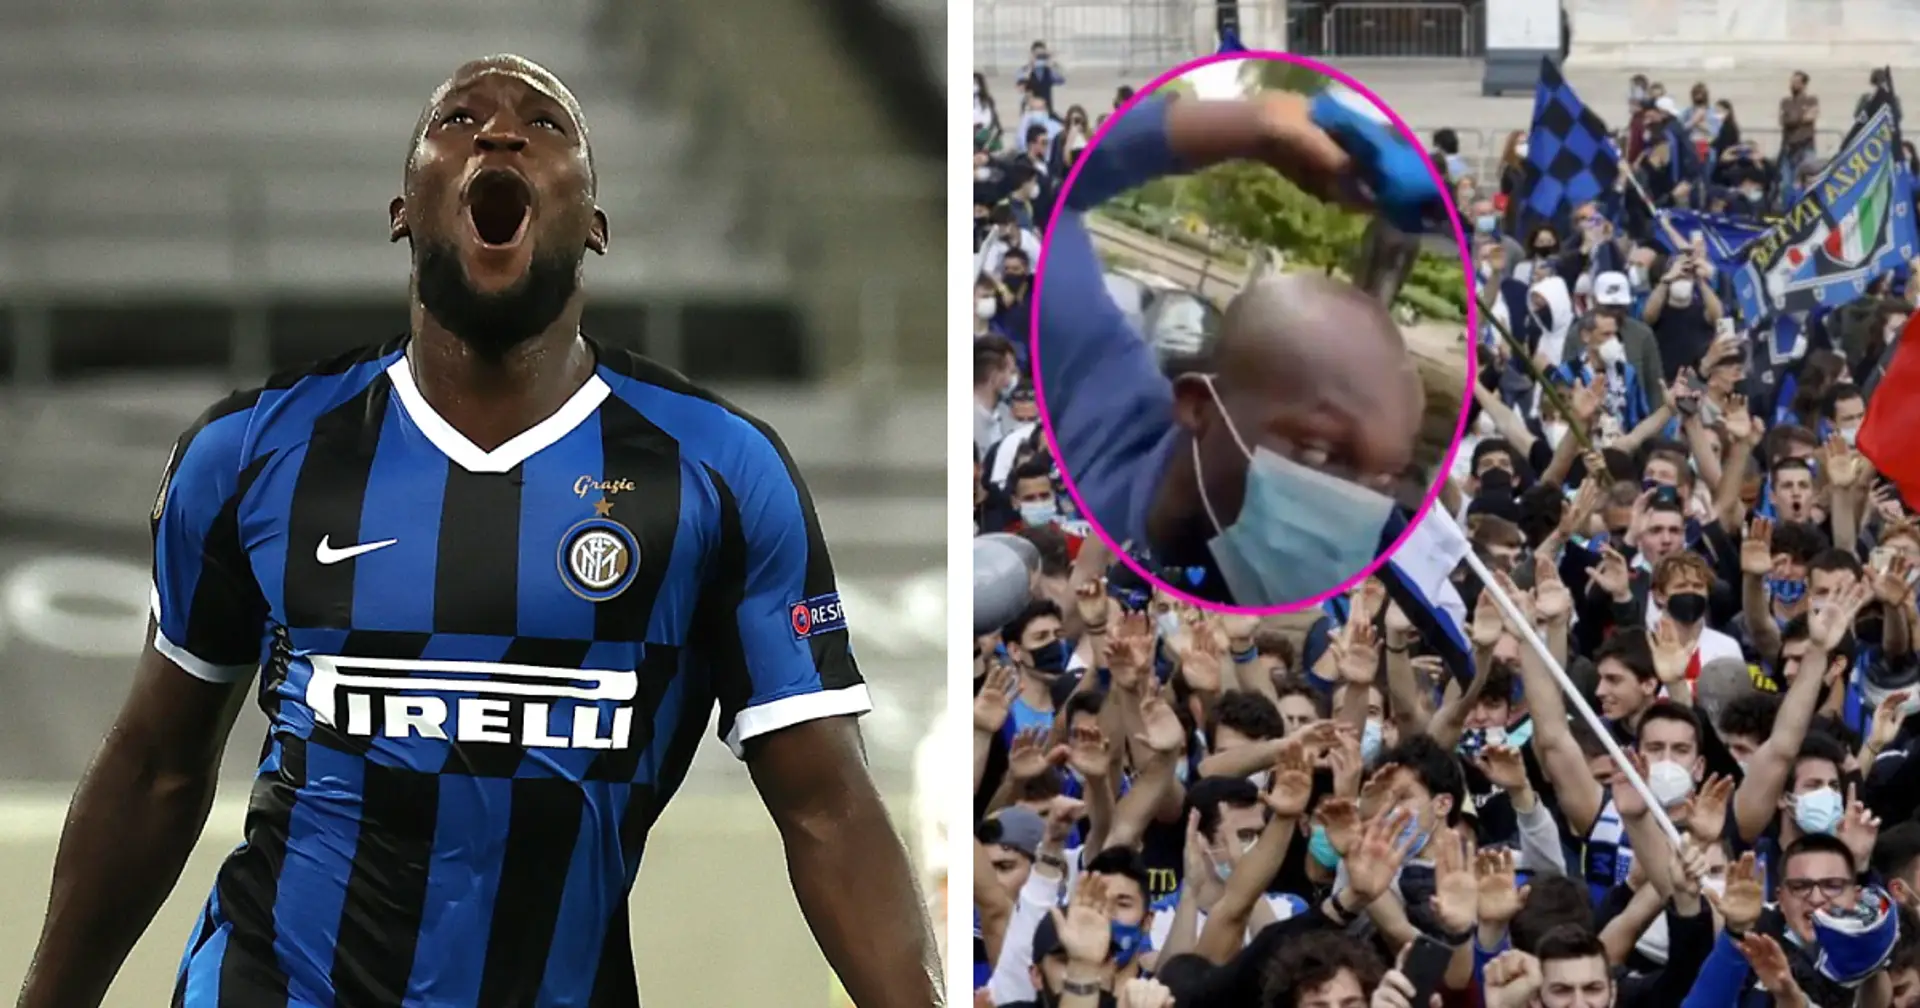 Lukaku after winning Serie A: 'This year was the best of my career. I'm truly so happy and proud to play for Inter'